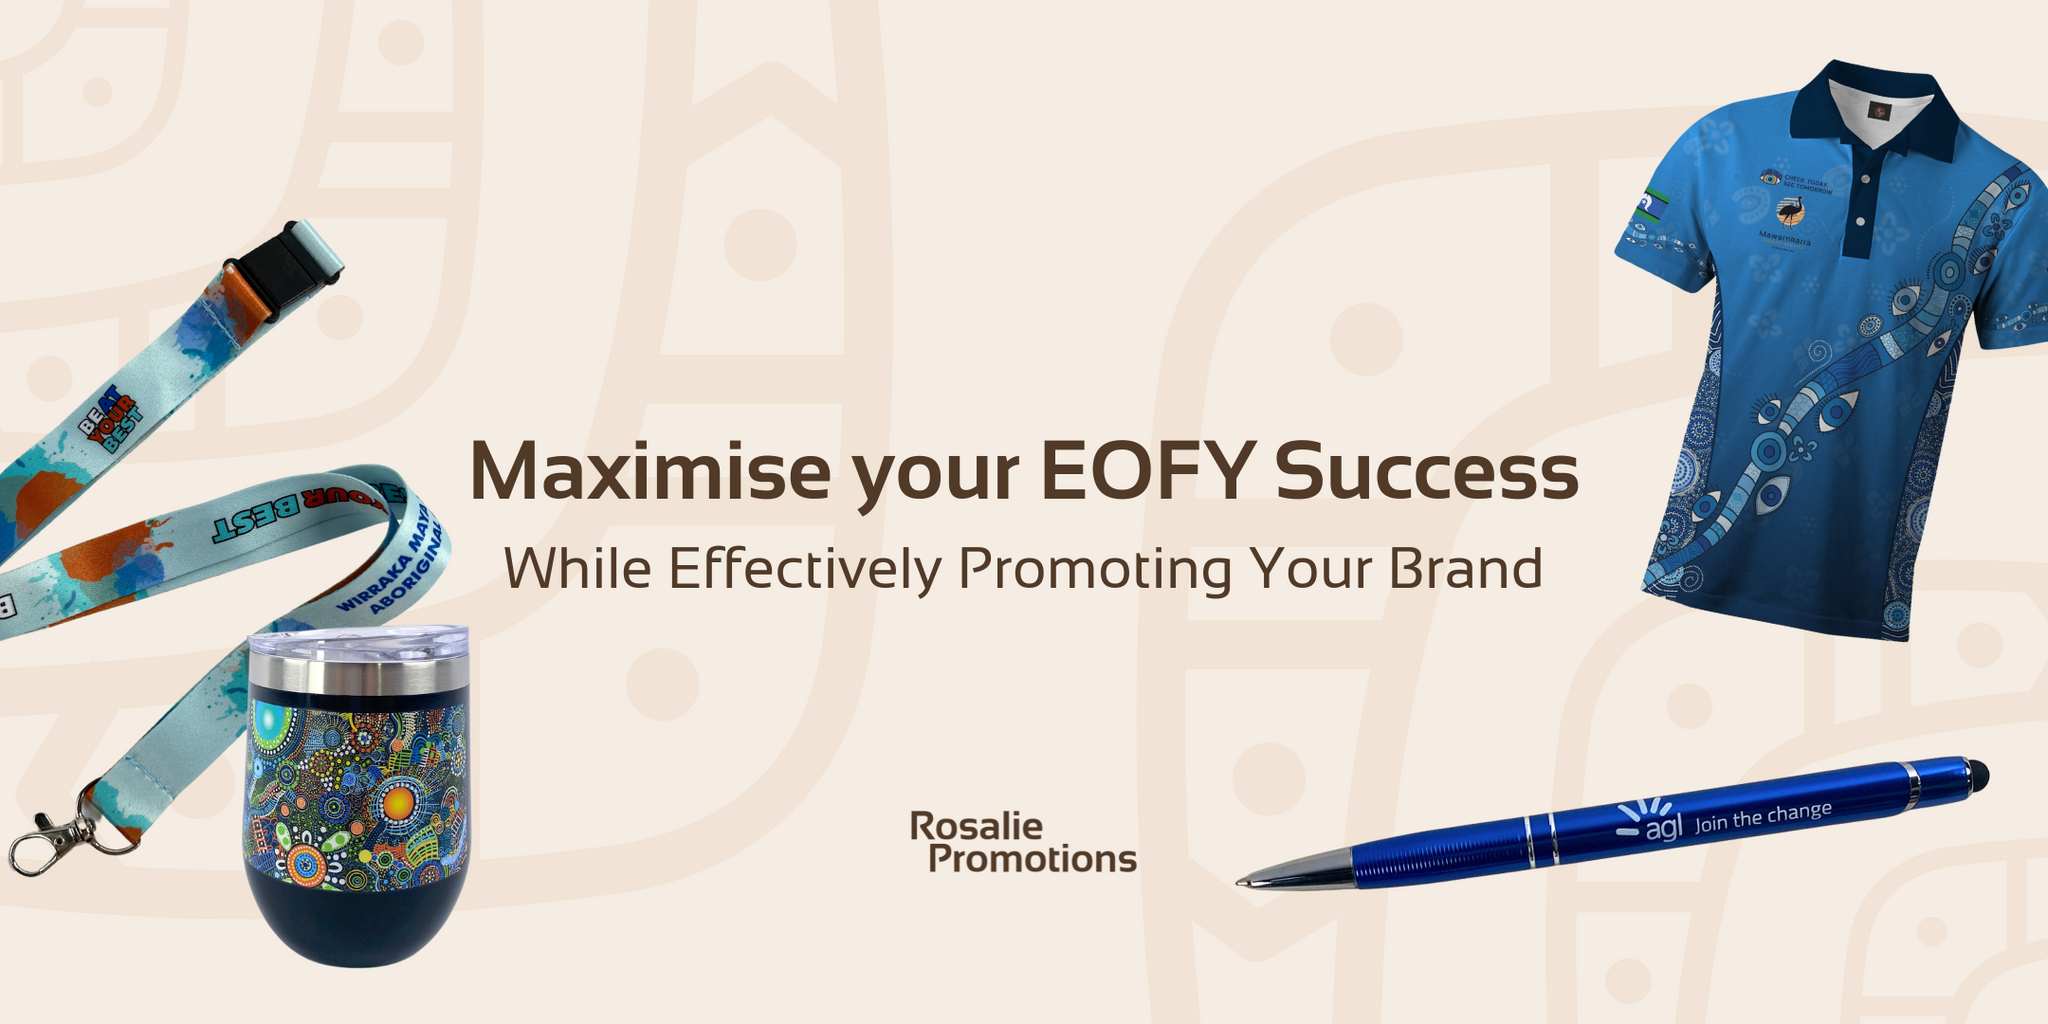 Maximising EOFY Success with Promotional Products